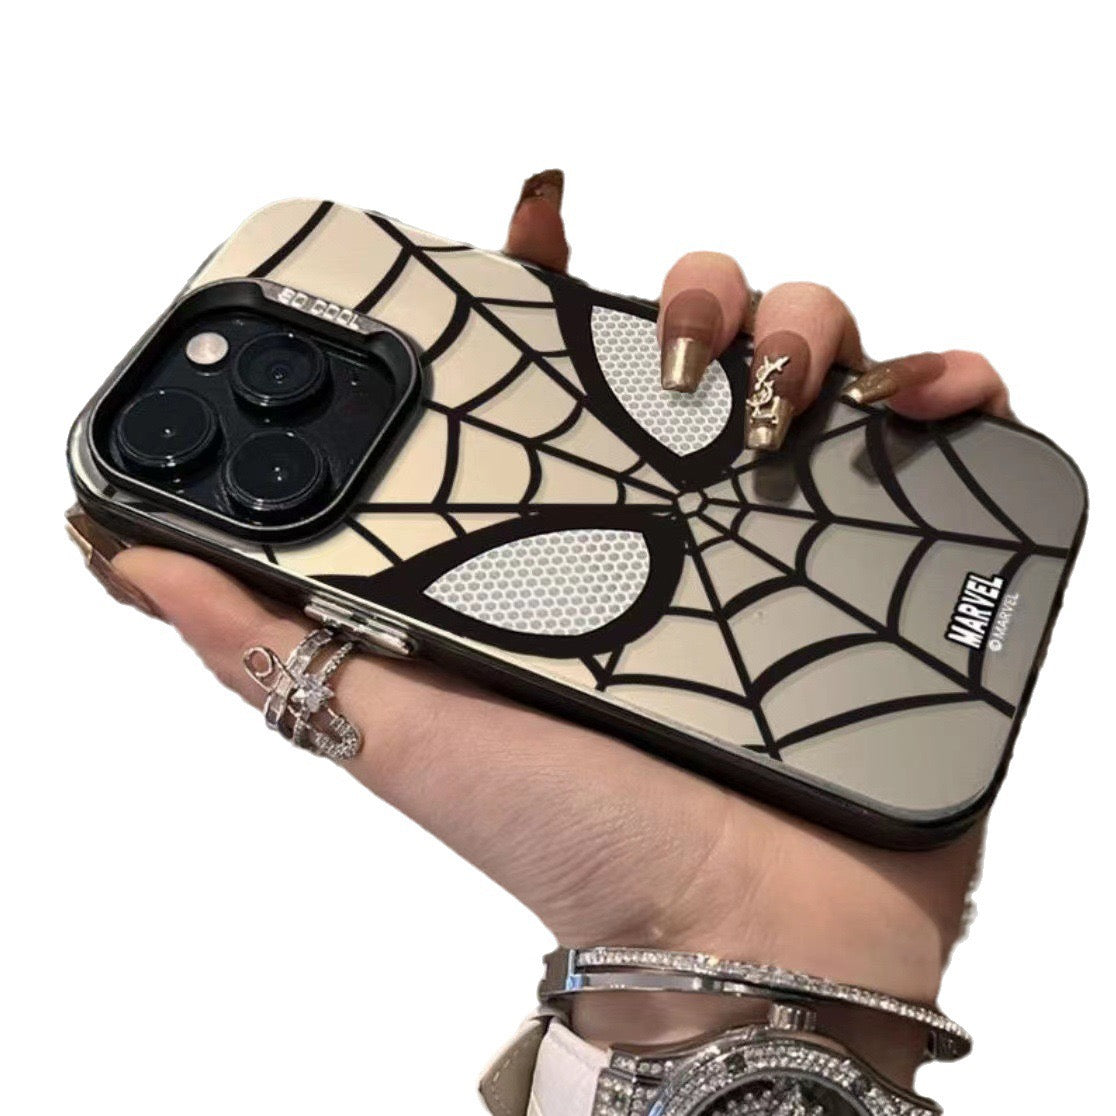 Spider Web Case for iPhones